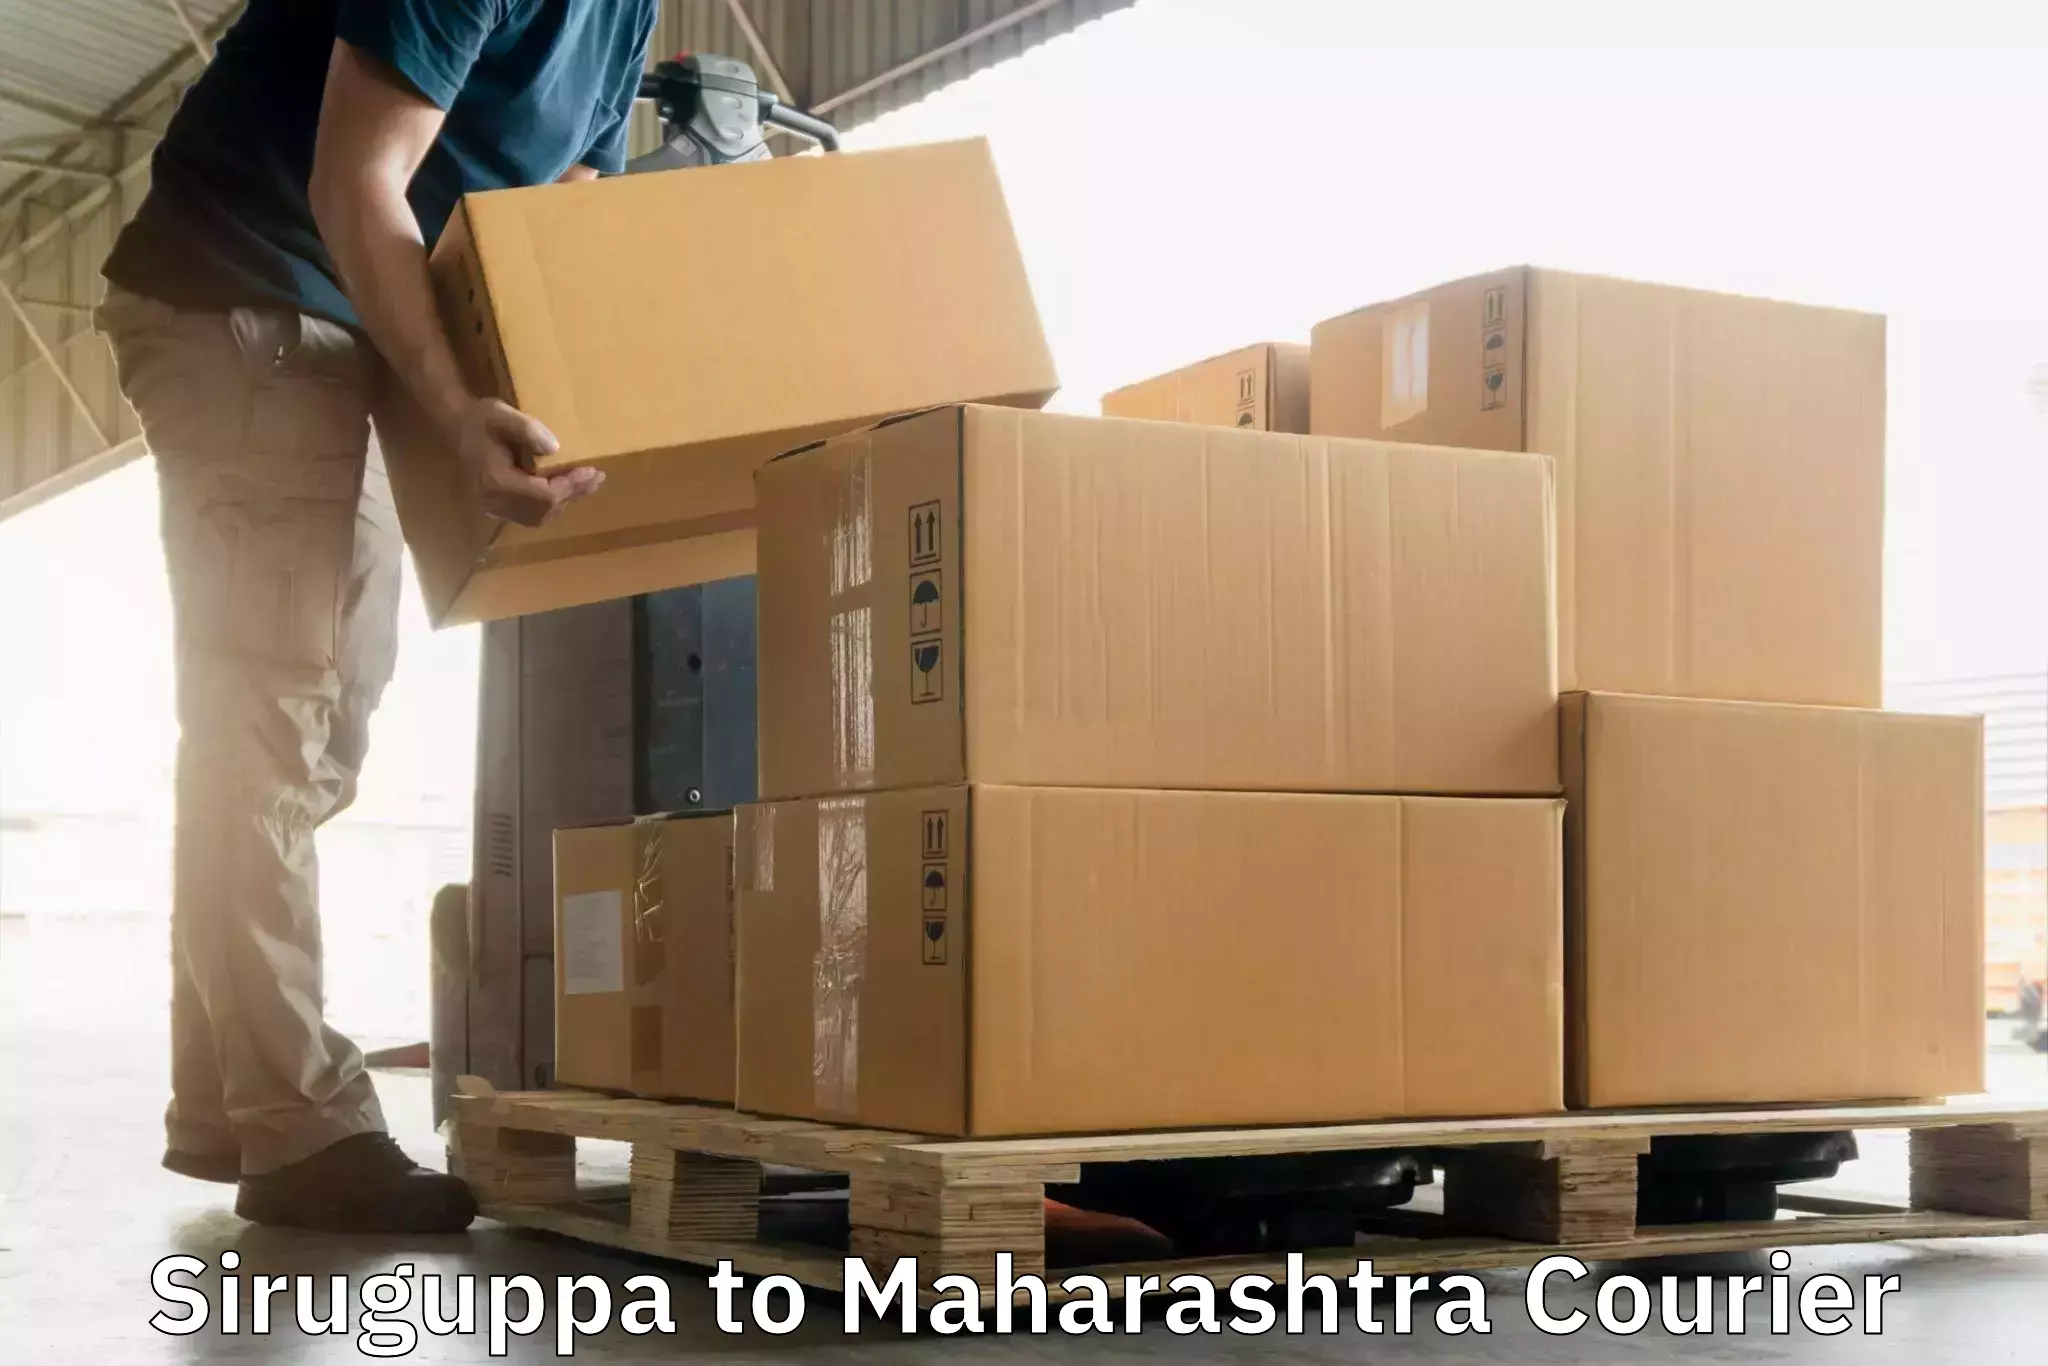 Parcel service for businesses Siruguppa to Mumbai Port